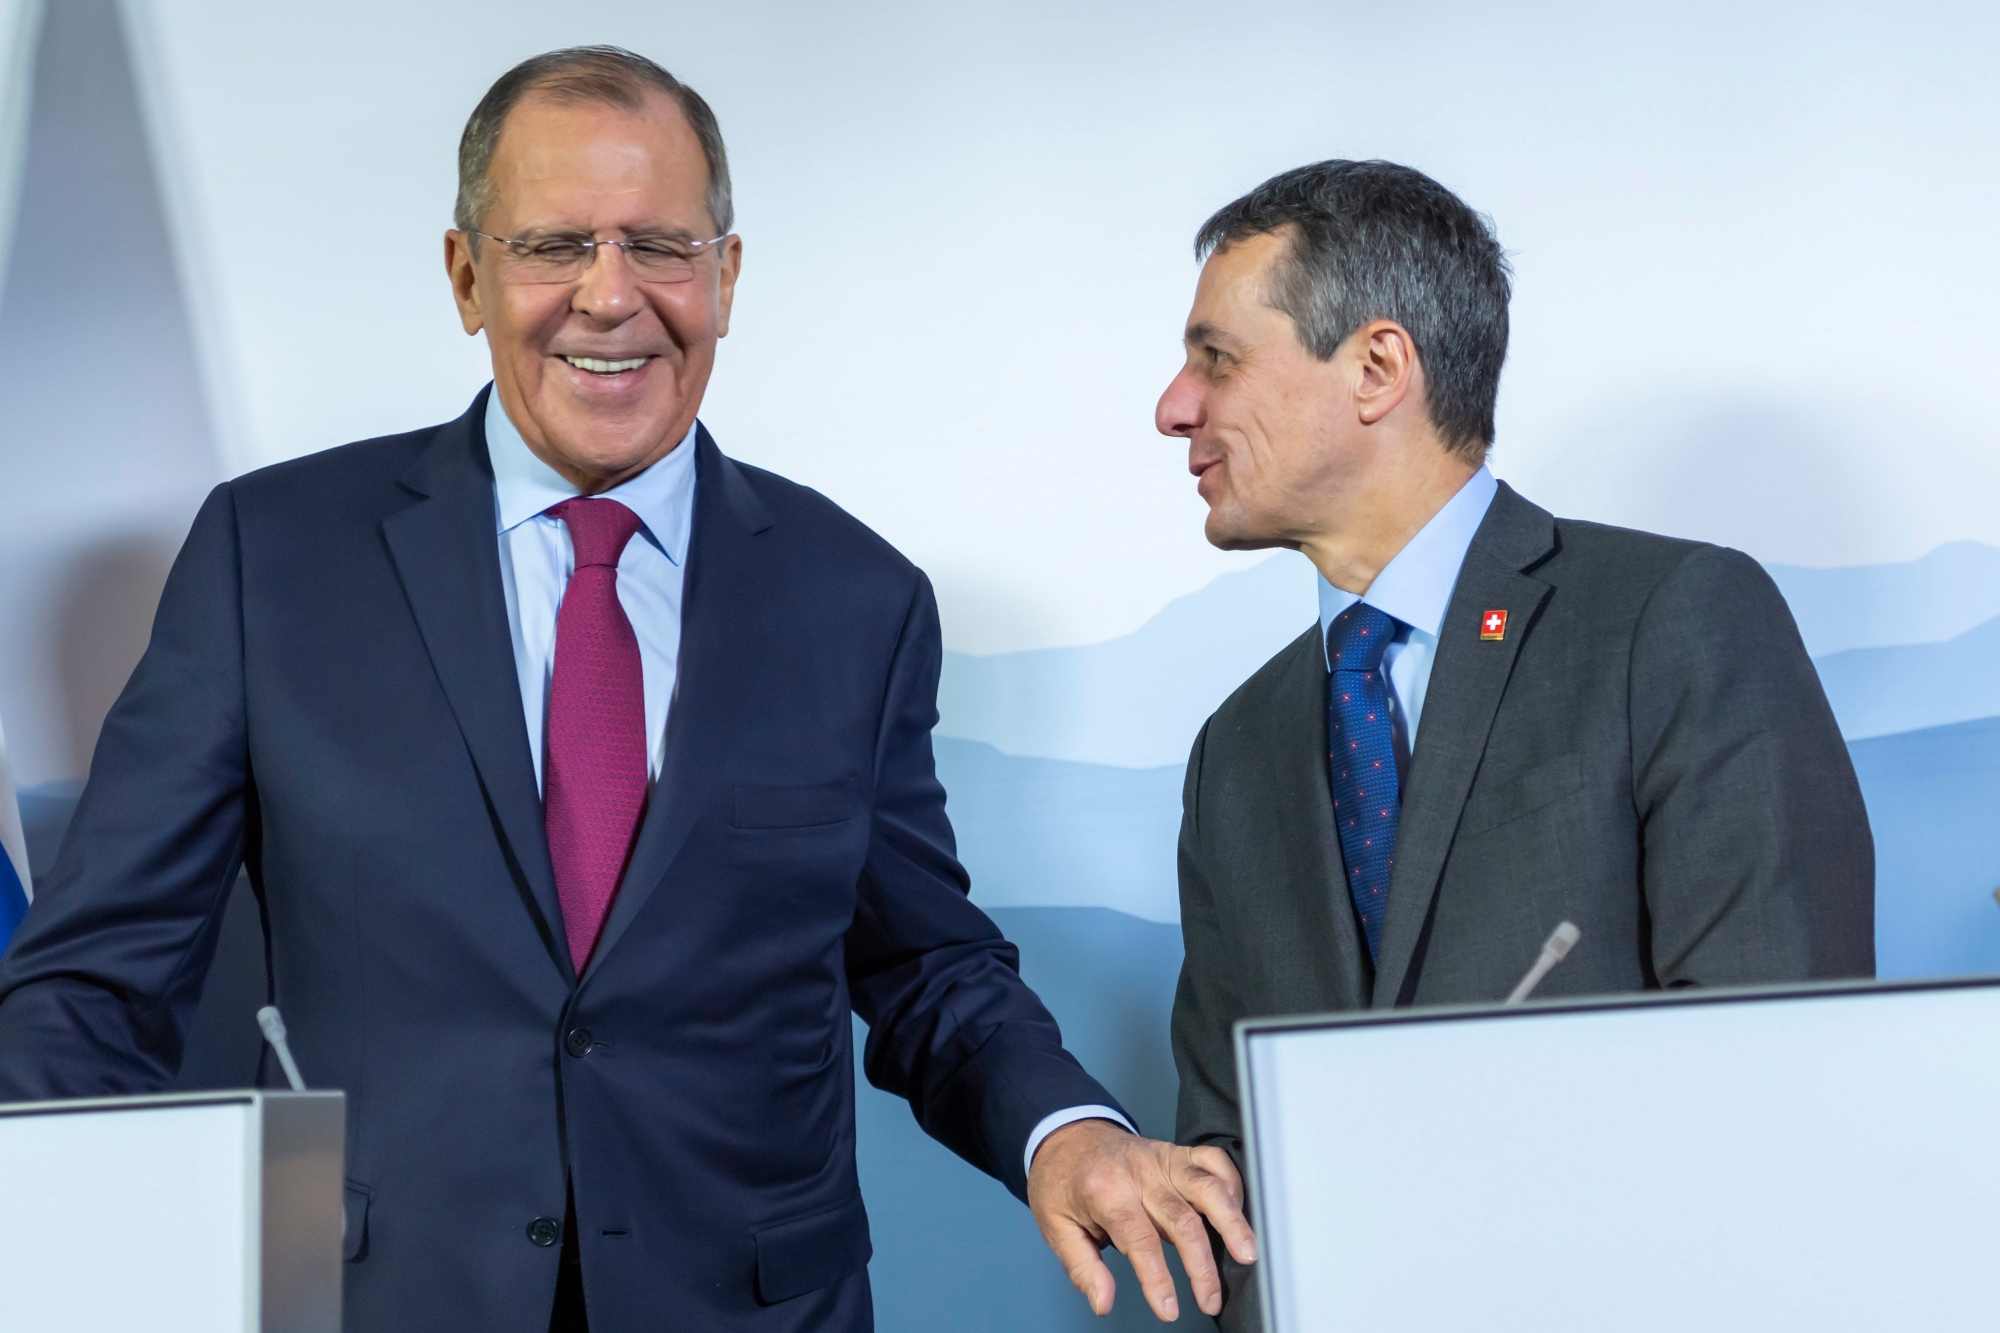 Russian Foreign Minister Sergey Lavrov, left, and Switzerland's Federal Councillor and Foreign Minister Ignazio Cassis, right, speak during a press conference following their meeting in Geneva, Switzerland, Wednesday, November 28, 2018. (KEYSTONE/Martial Trezzini) SWITZERLAND GENEVA MEETING CASSIS LAVROV